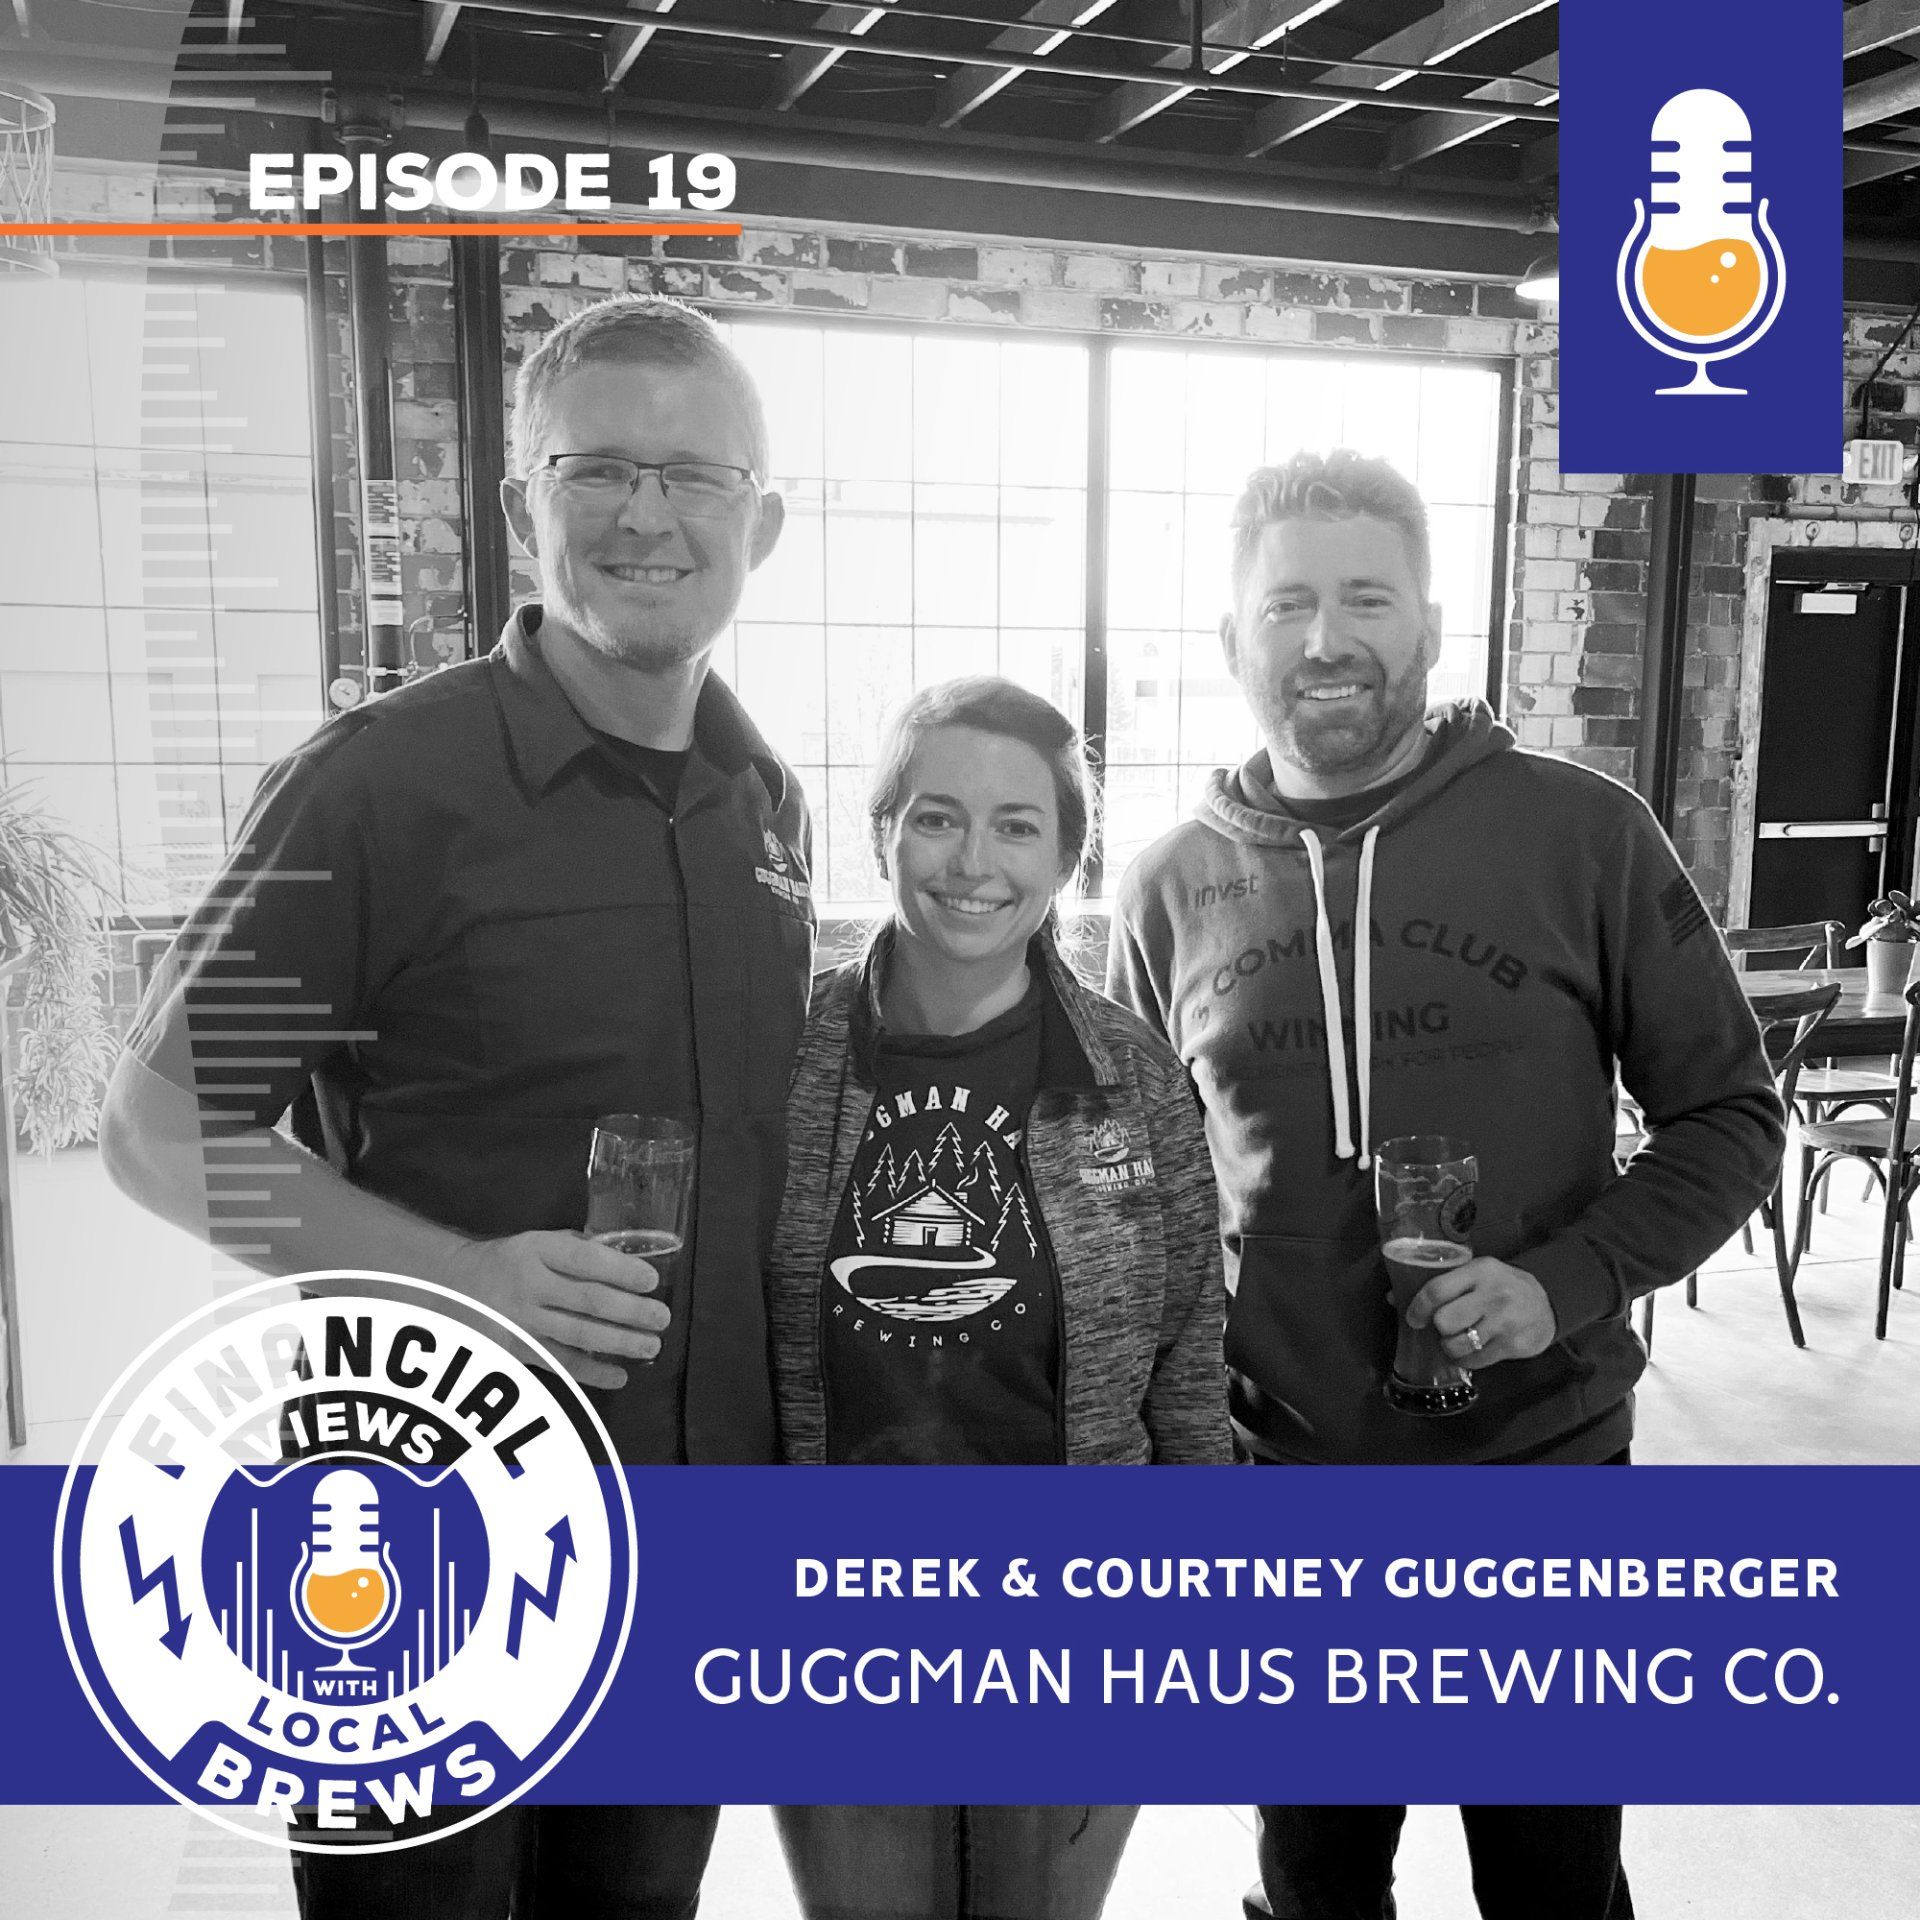 Financial Views with Local Brews Podcast Episode 19 Guggman Haus Brewing Co.